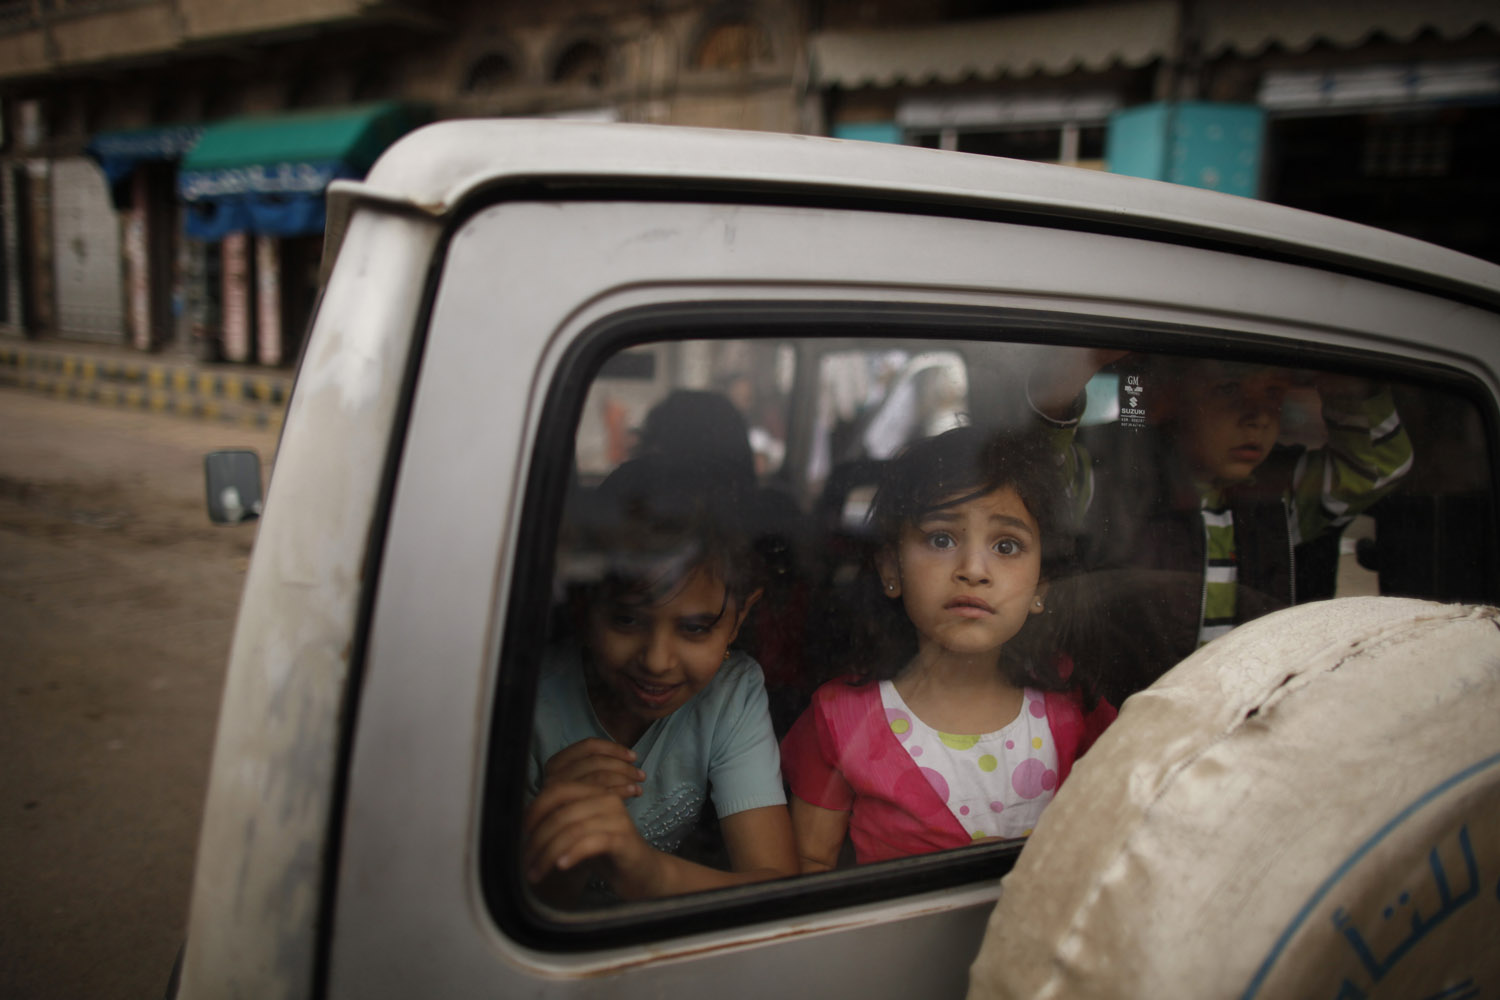 March 28, 2013. Children watch from the rear window of a car as protesters march past demanding Yemen's former President Ali Abdullah Saleh's immunity be stripped and that he stand trial for the killings of protesters who demanded the end of his 33-year rule, in Sanaa.